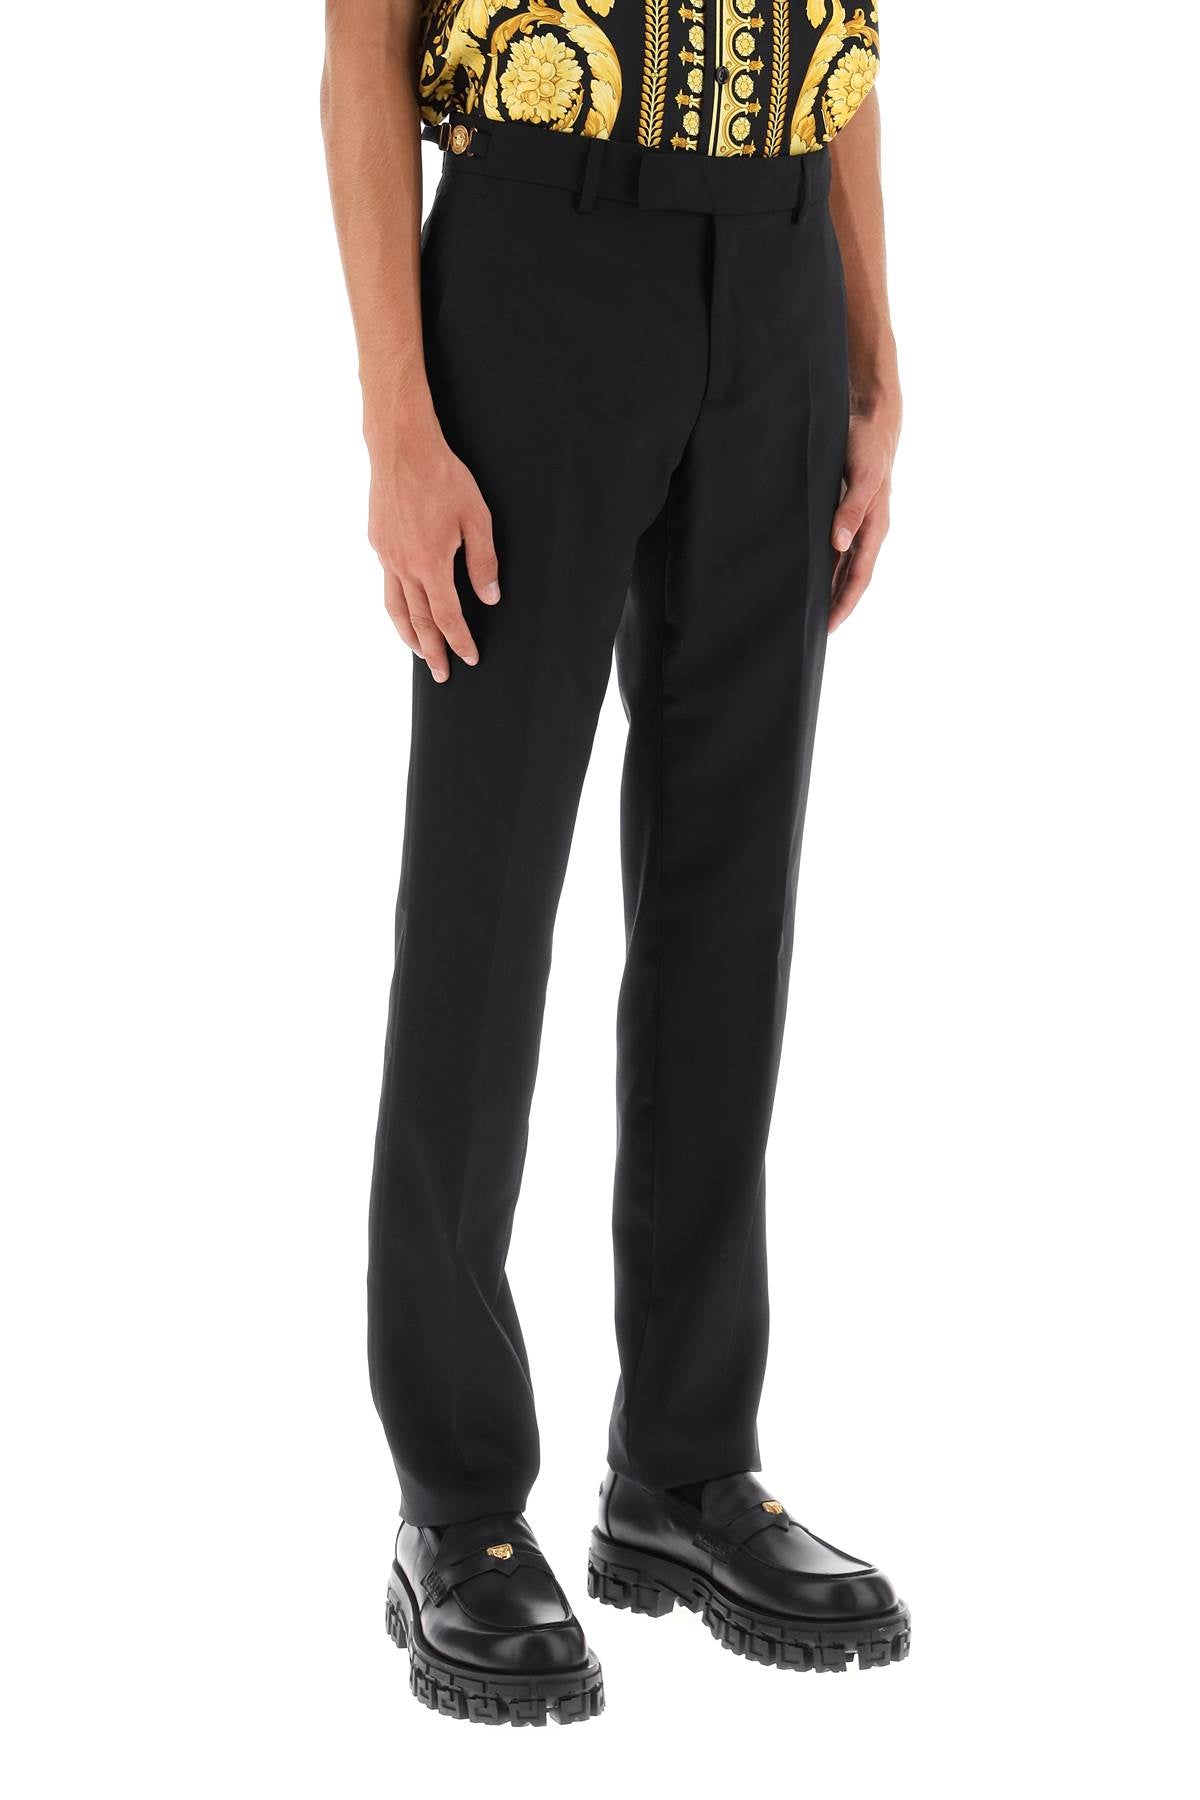 Versace tailored pants with medusa details-1